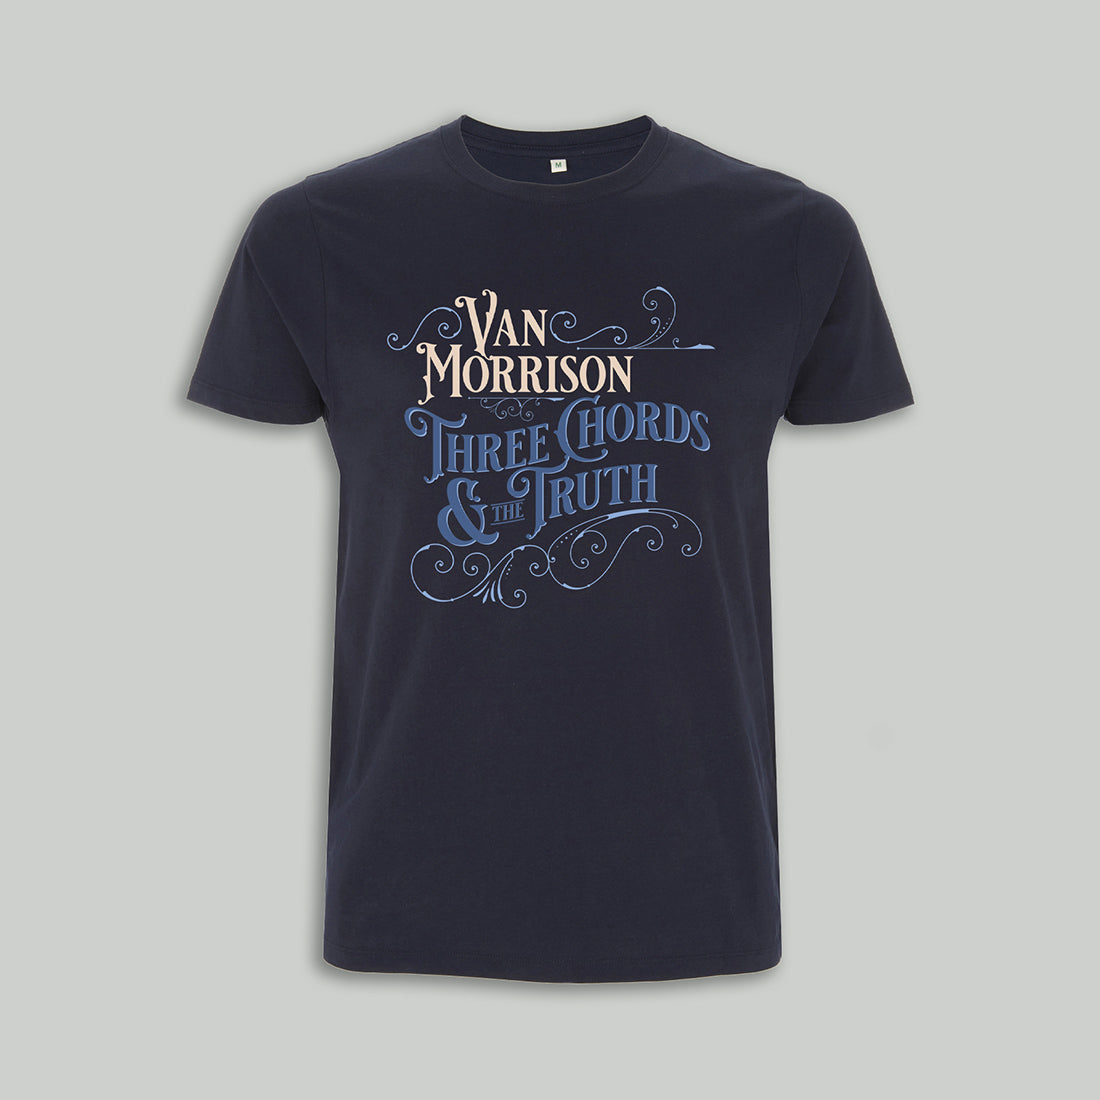 Van Morrison - Three Chords And The Truth T-Shirt